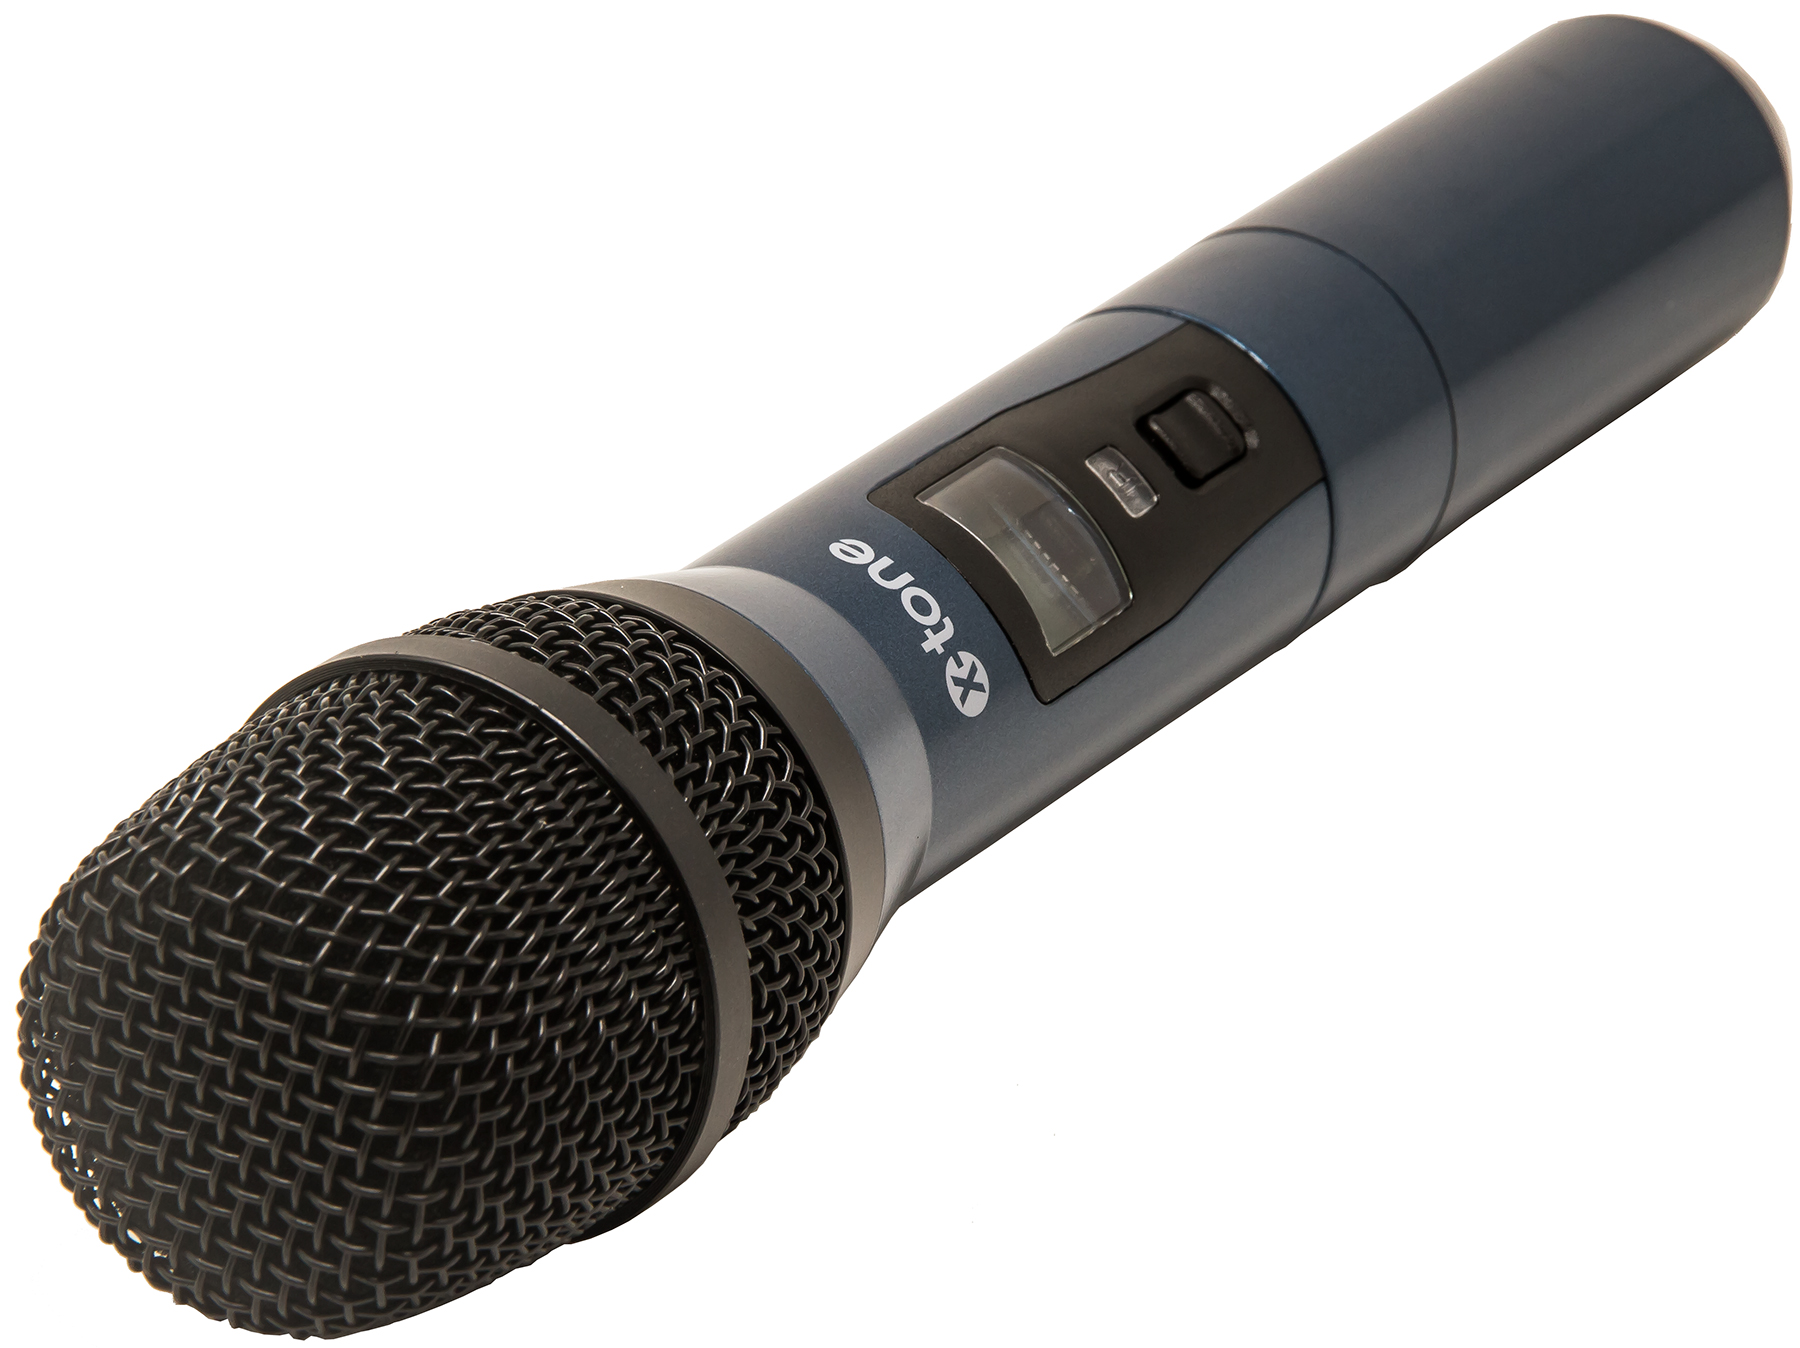 X-tone Xhf200 Systeme Hf Main Multi Frequences - Wireless handheld microphone - Variation 4